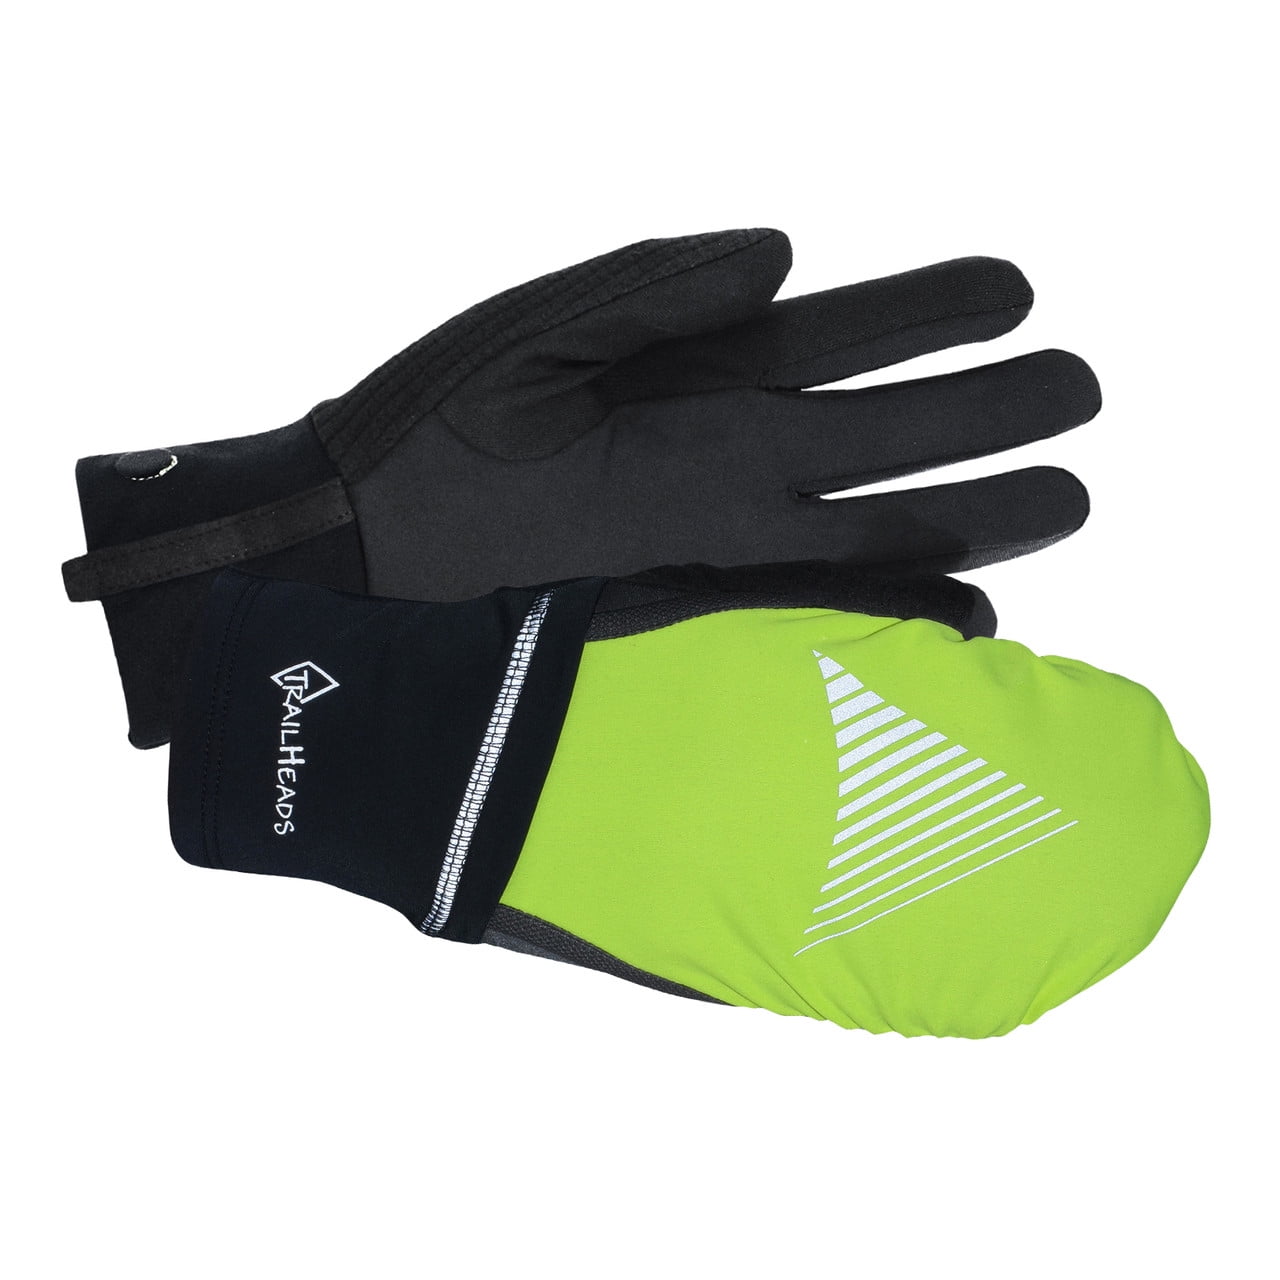 TrailHeads Men's Touchscreen Gloves with Reflective Waterproof